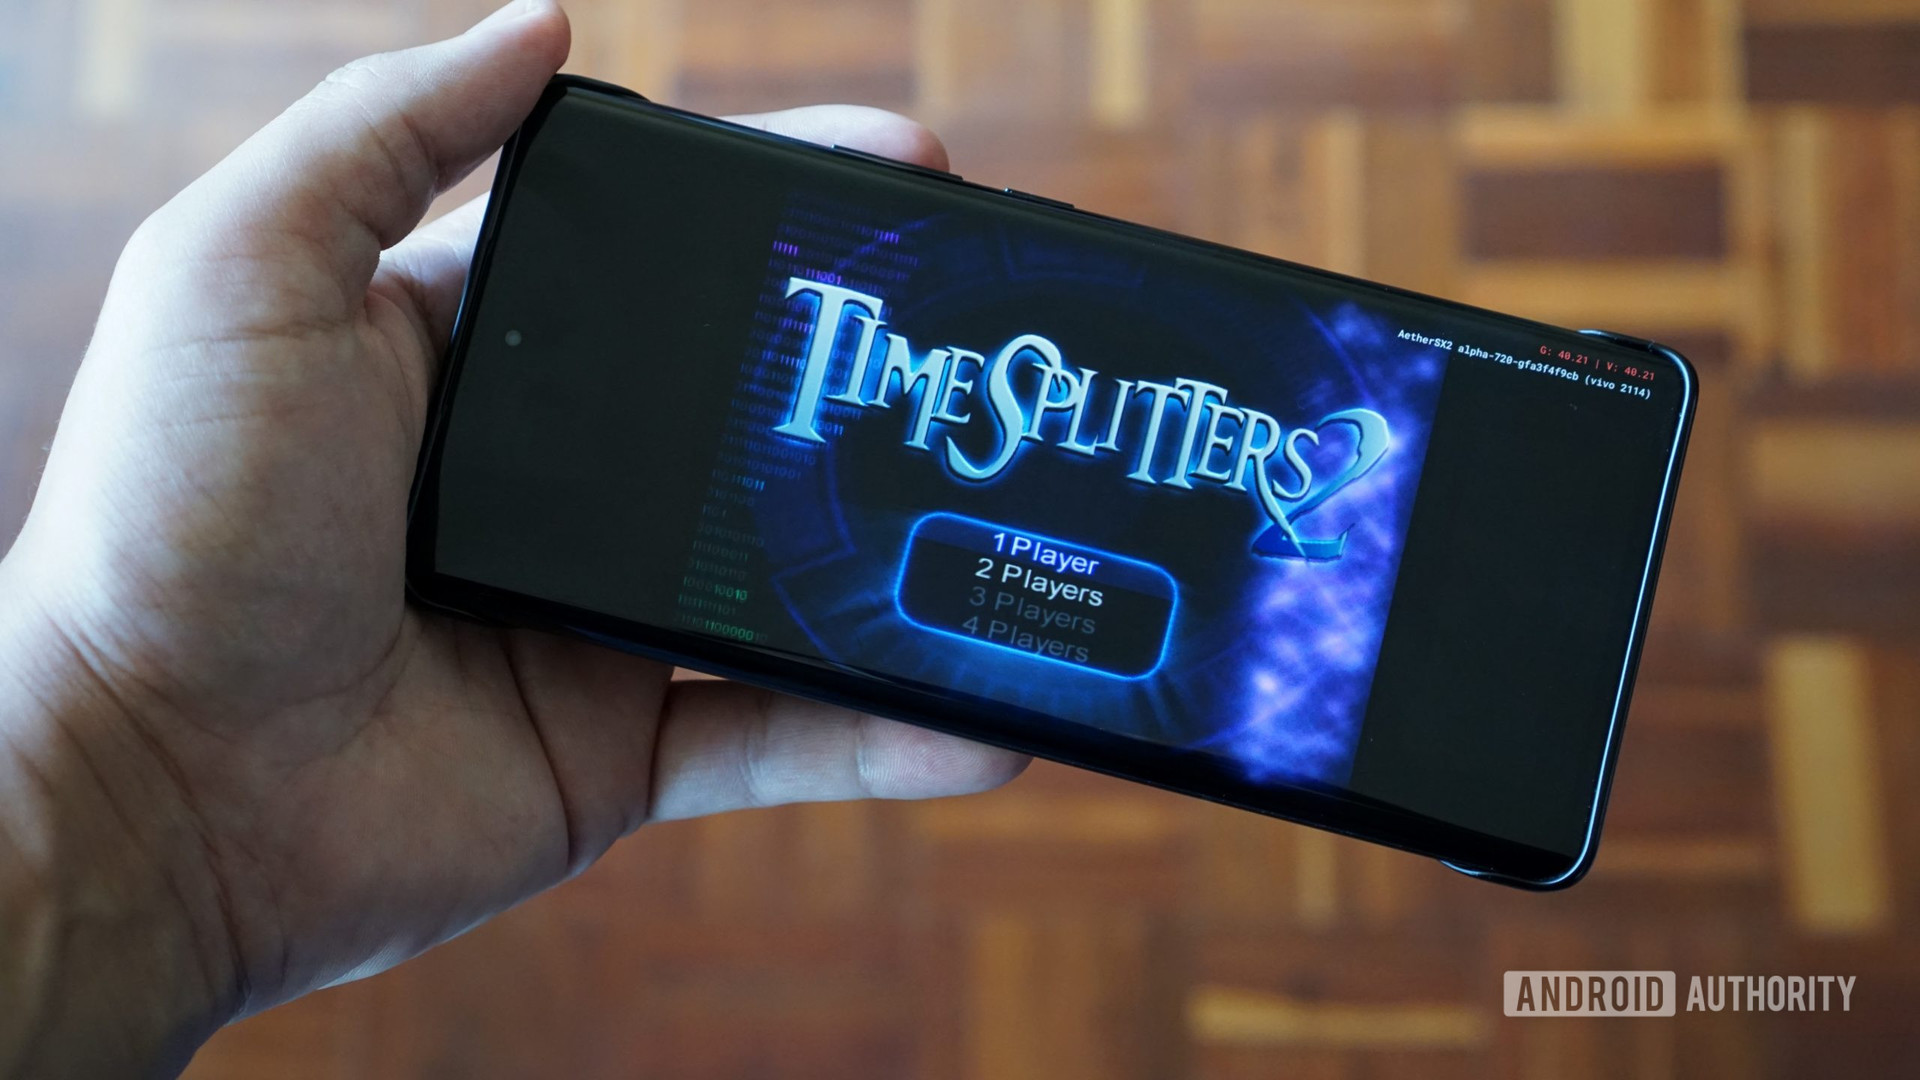 AetherSX2 emulator edit showing TimeSplitters game on a phone in hand